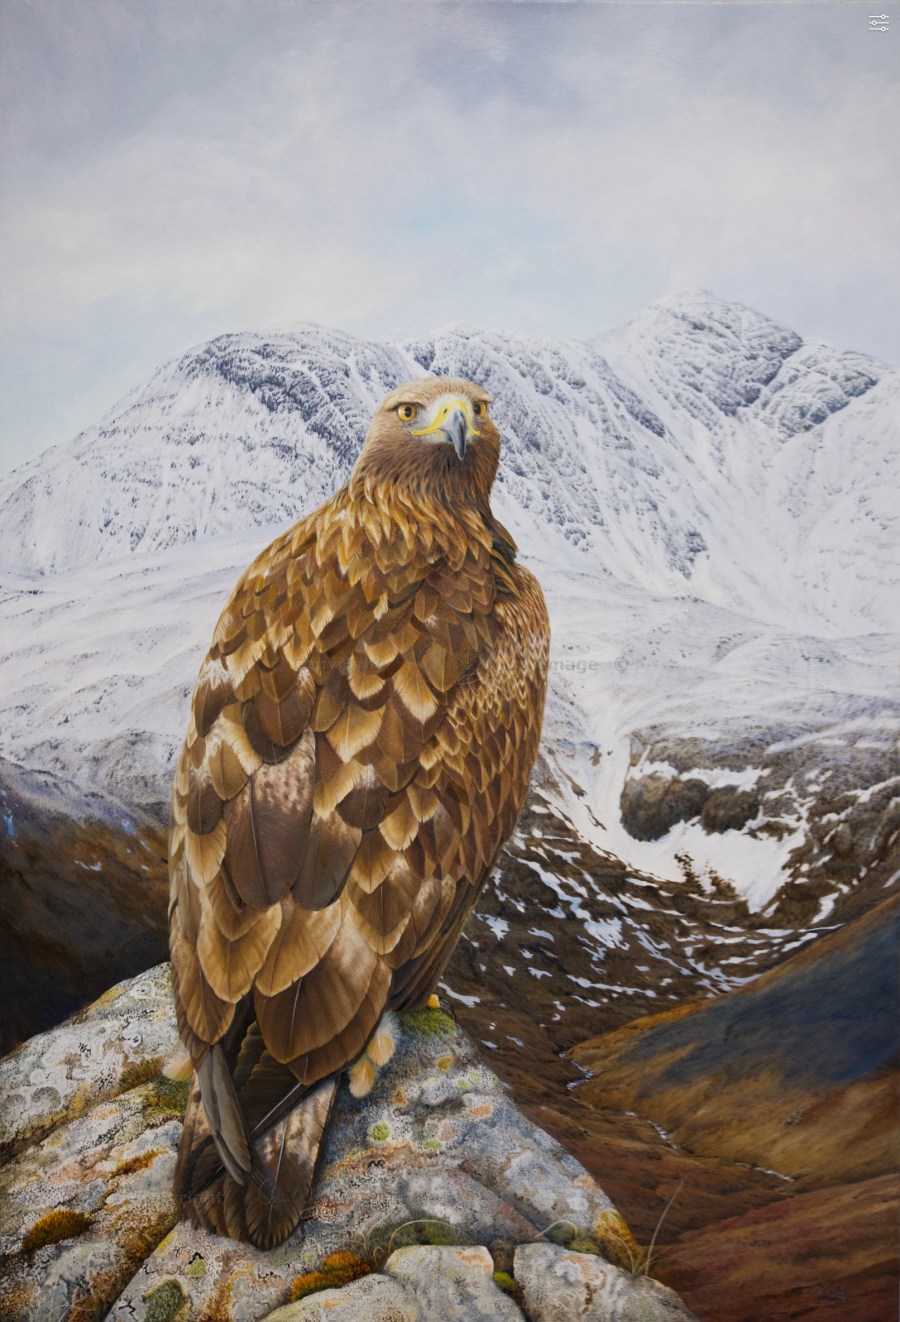 Highlander oil on gesso board. A painting by Colin Woolf.